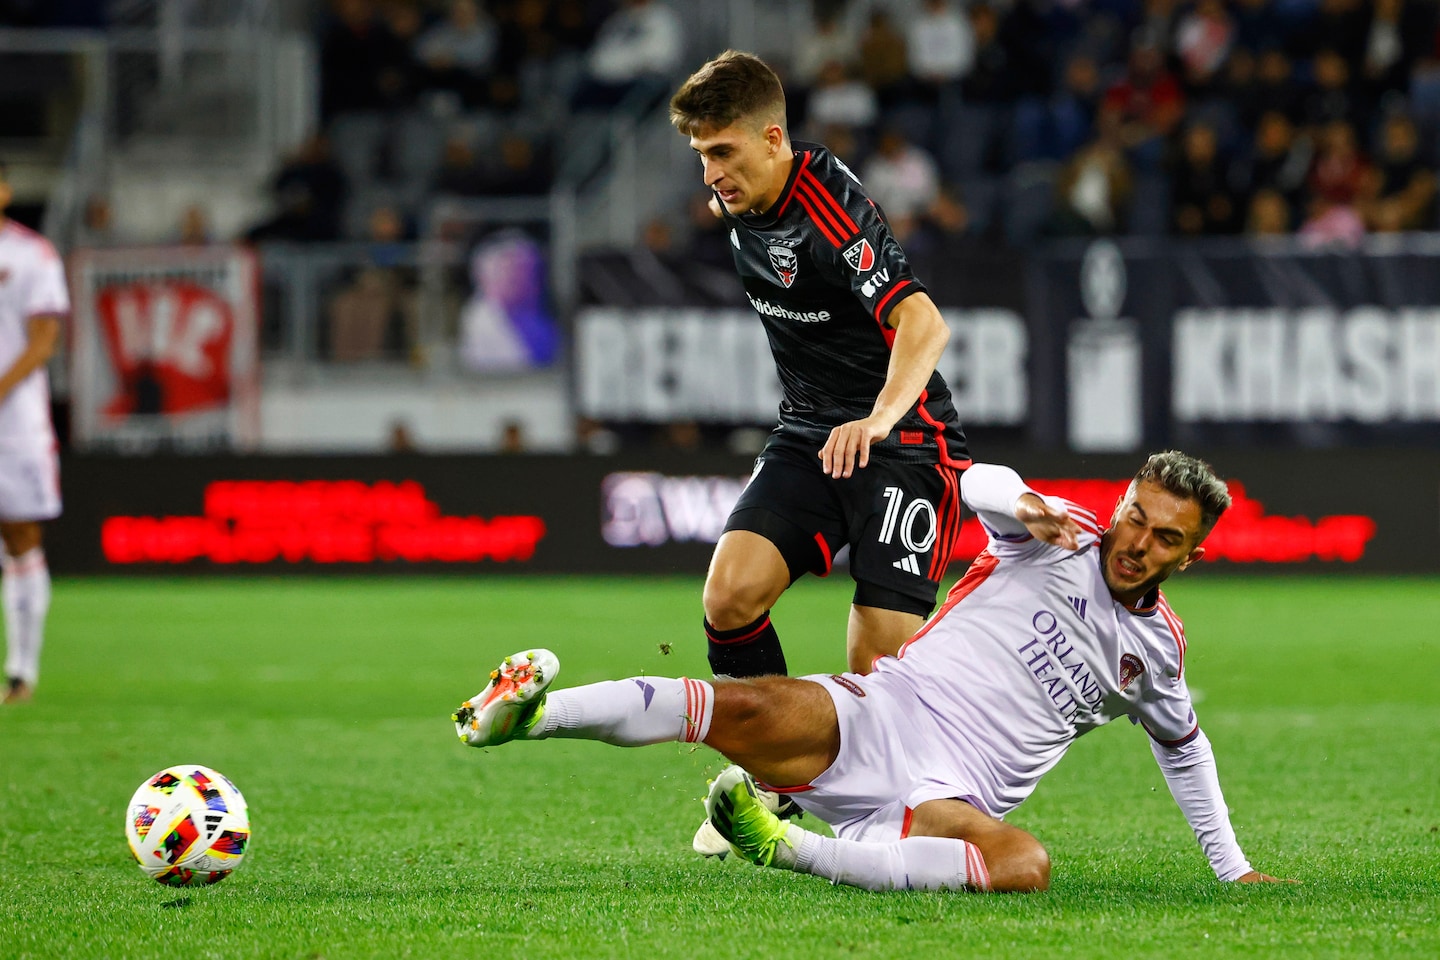 D.C. United collapses late in demoralizing loss to Orlando City